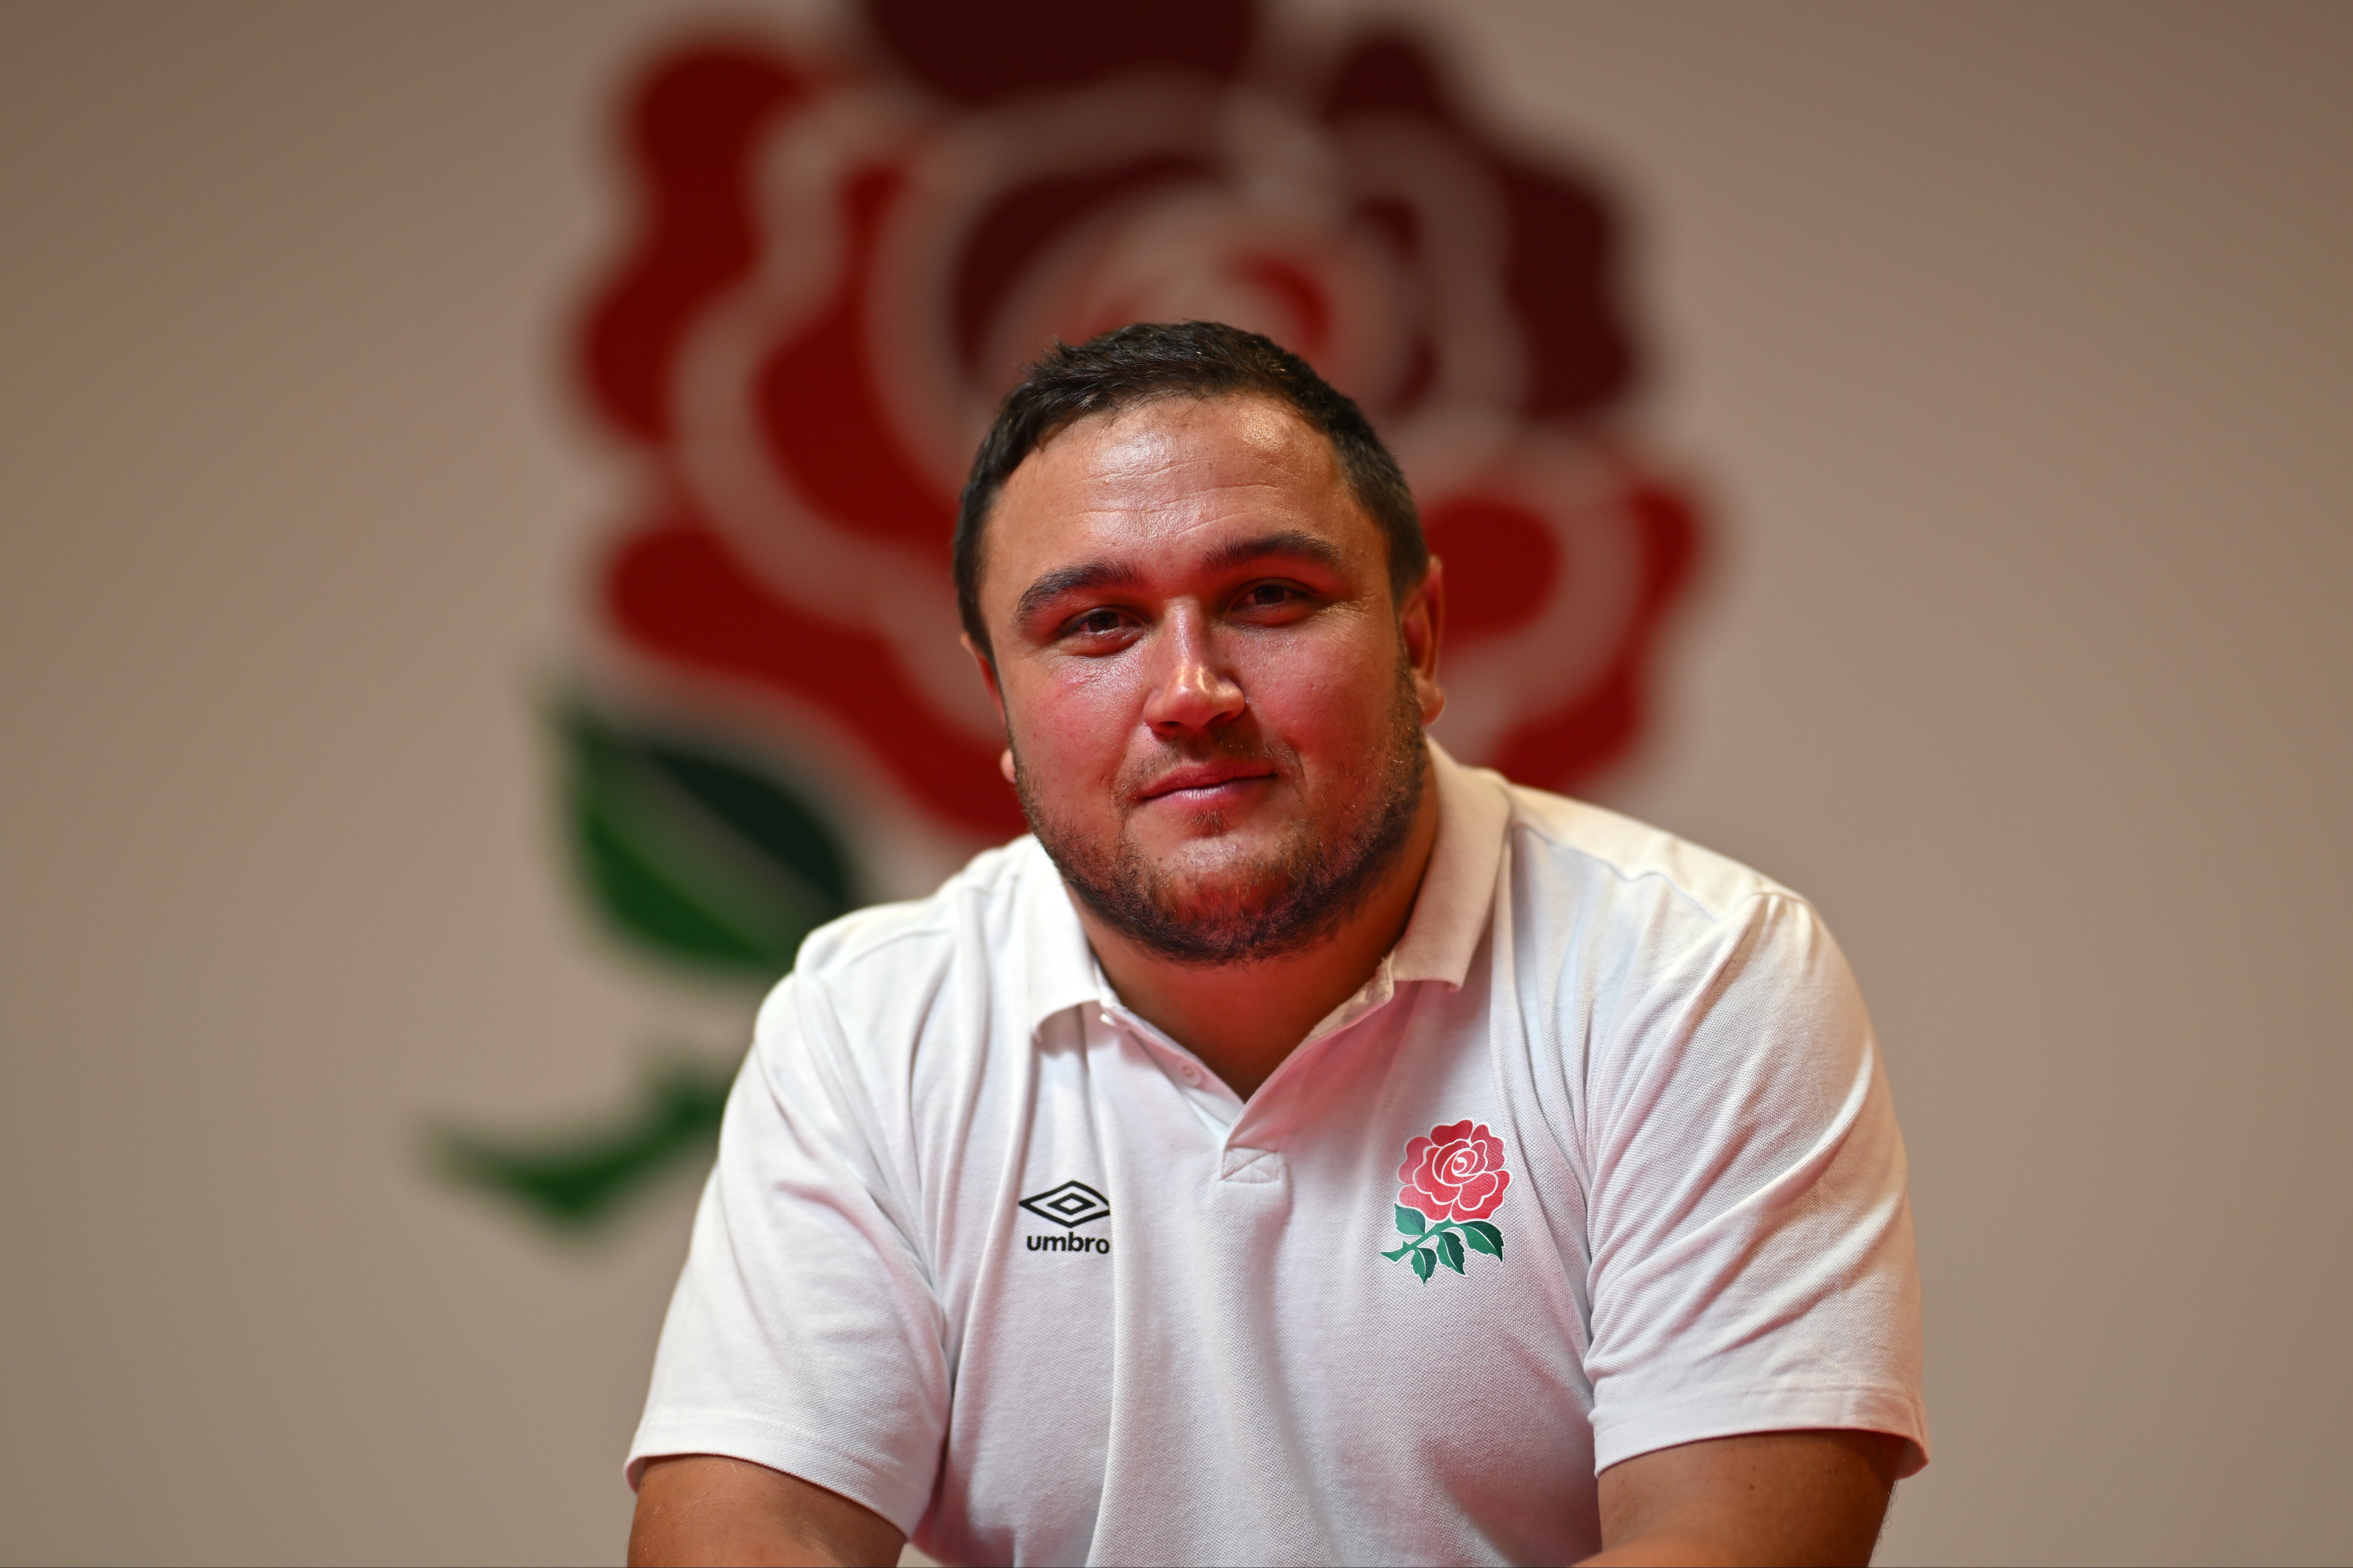 Jamie George has admitted he understands fans’ frustration at England’s performances